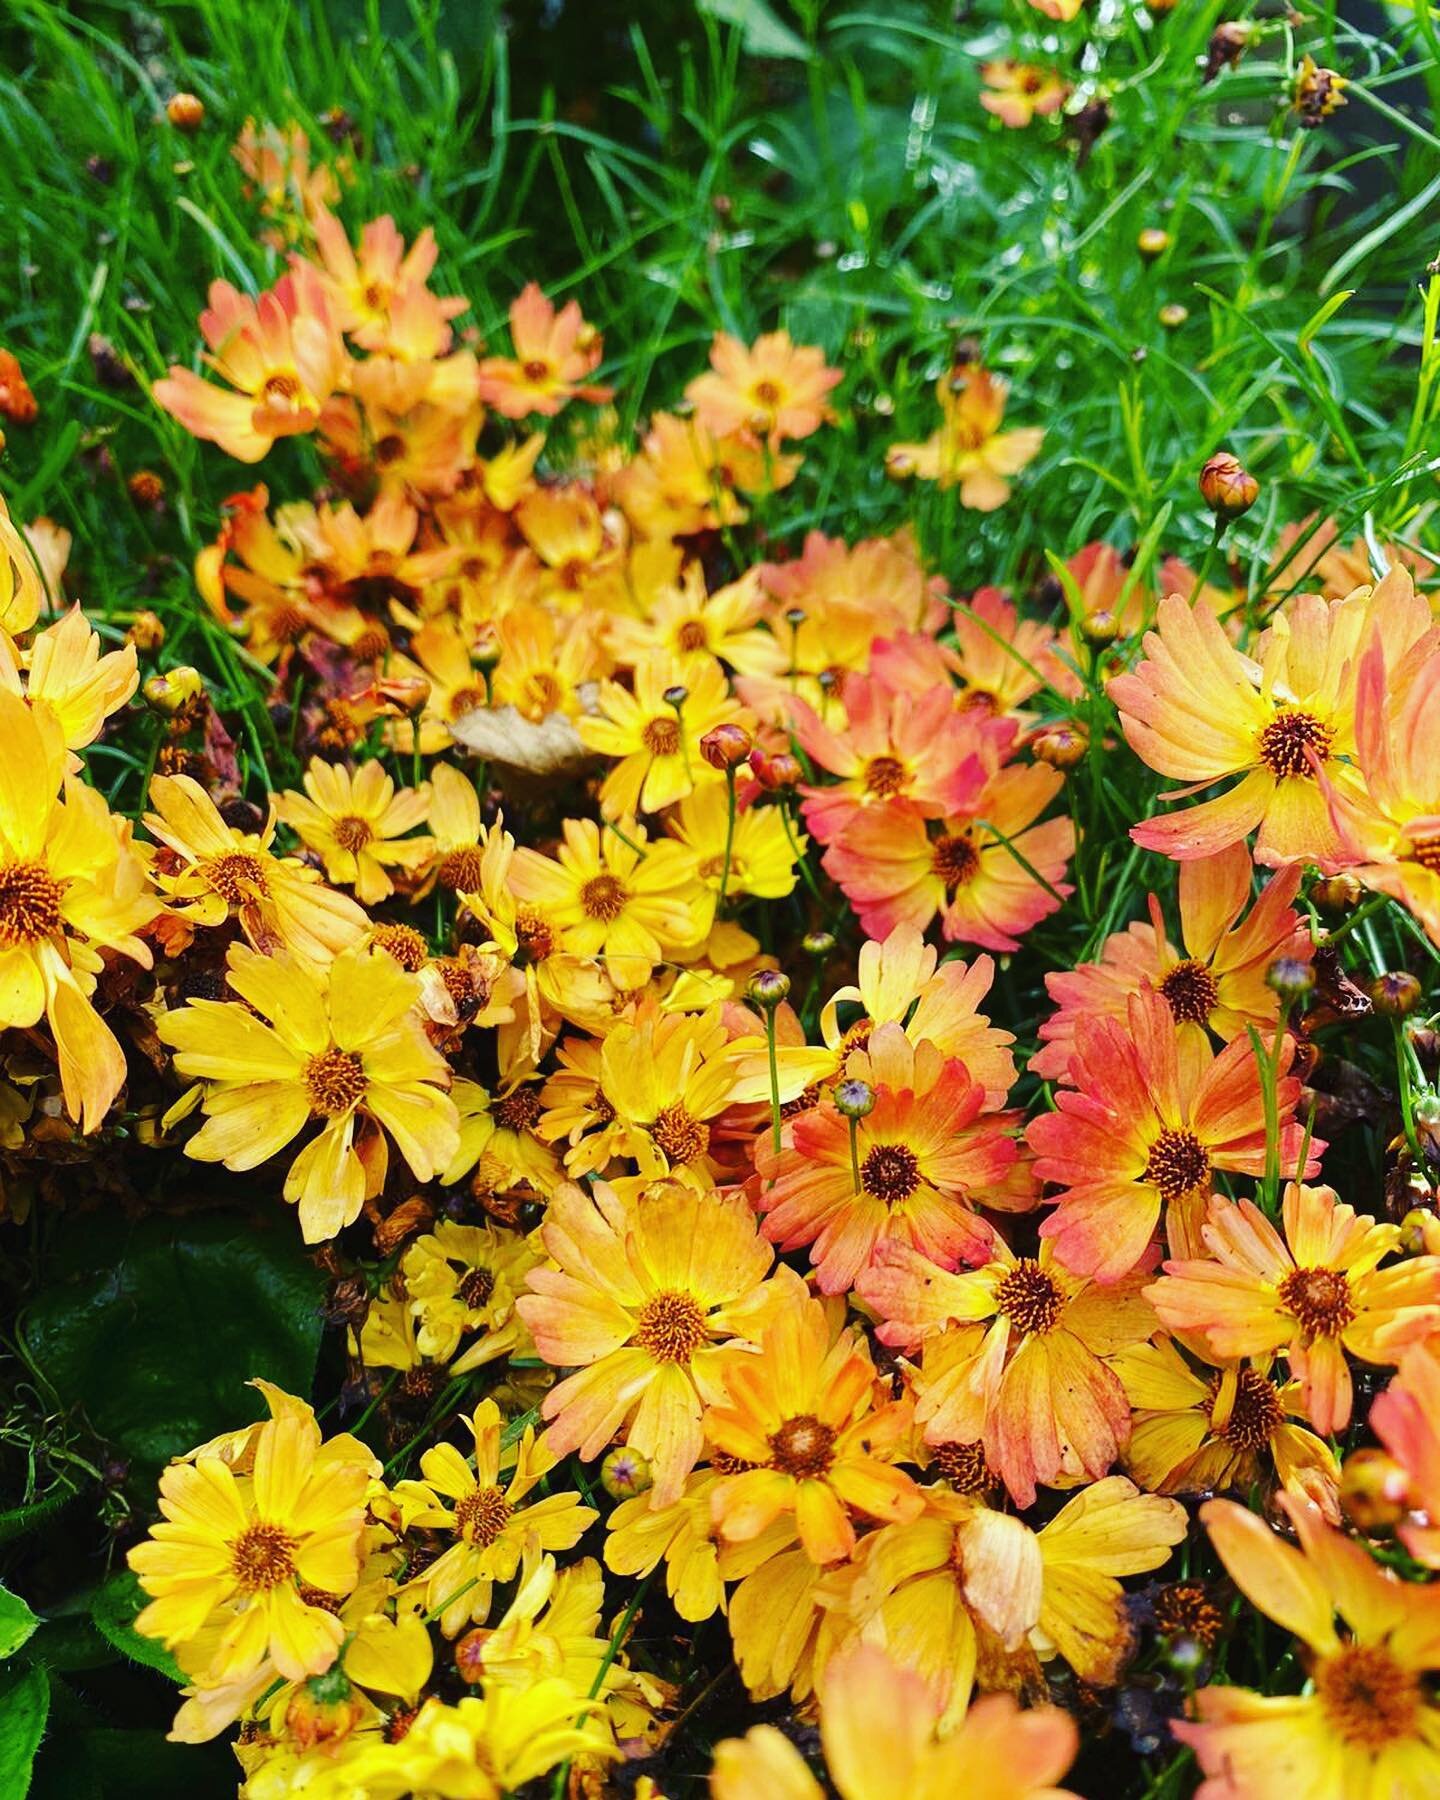 coreopsis &lsquo;mango punch&rsquo;
-
-
-
-
-

#wow #garden #summer #londongarden #plants #trees #landscaping #gardening #gardenservices #colourful #vibrant #happy #nature #haven #stunning #greenspace #lawn #beautiful #photooftheday #wild #wildflower